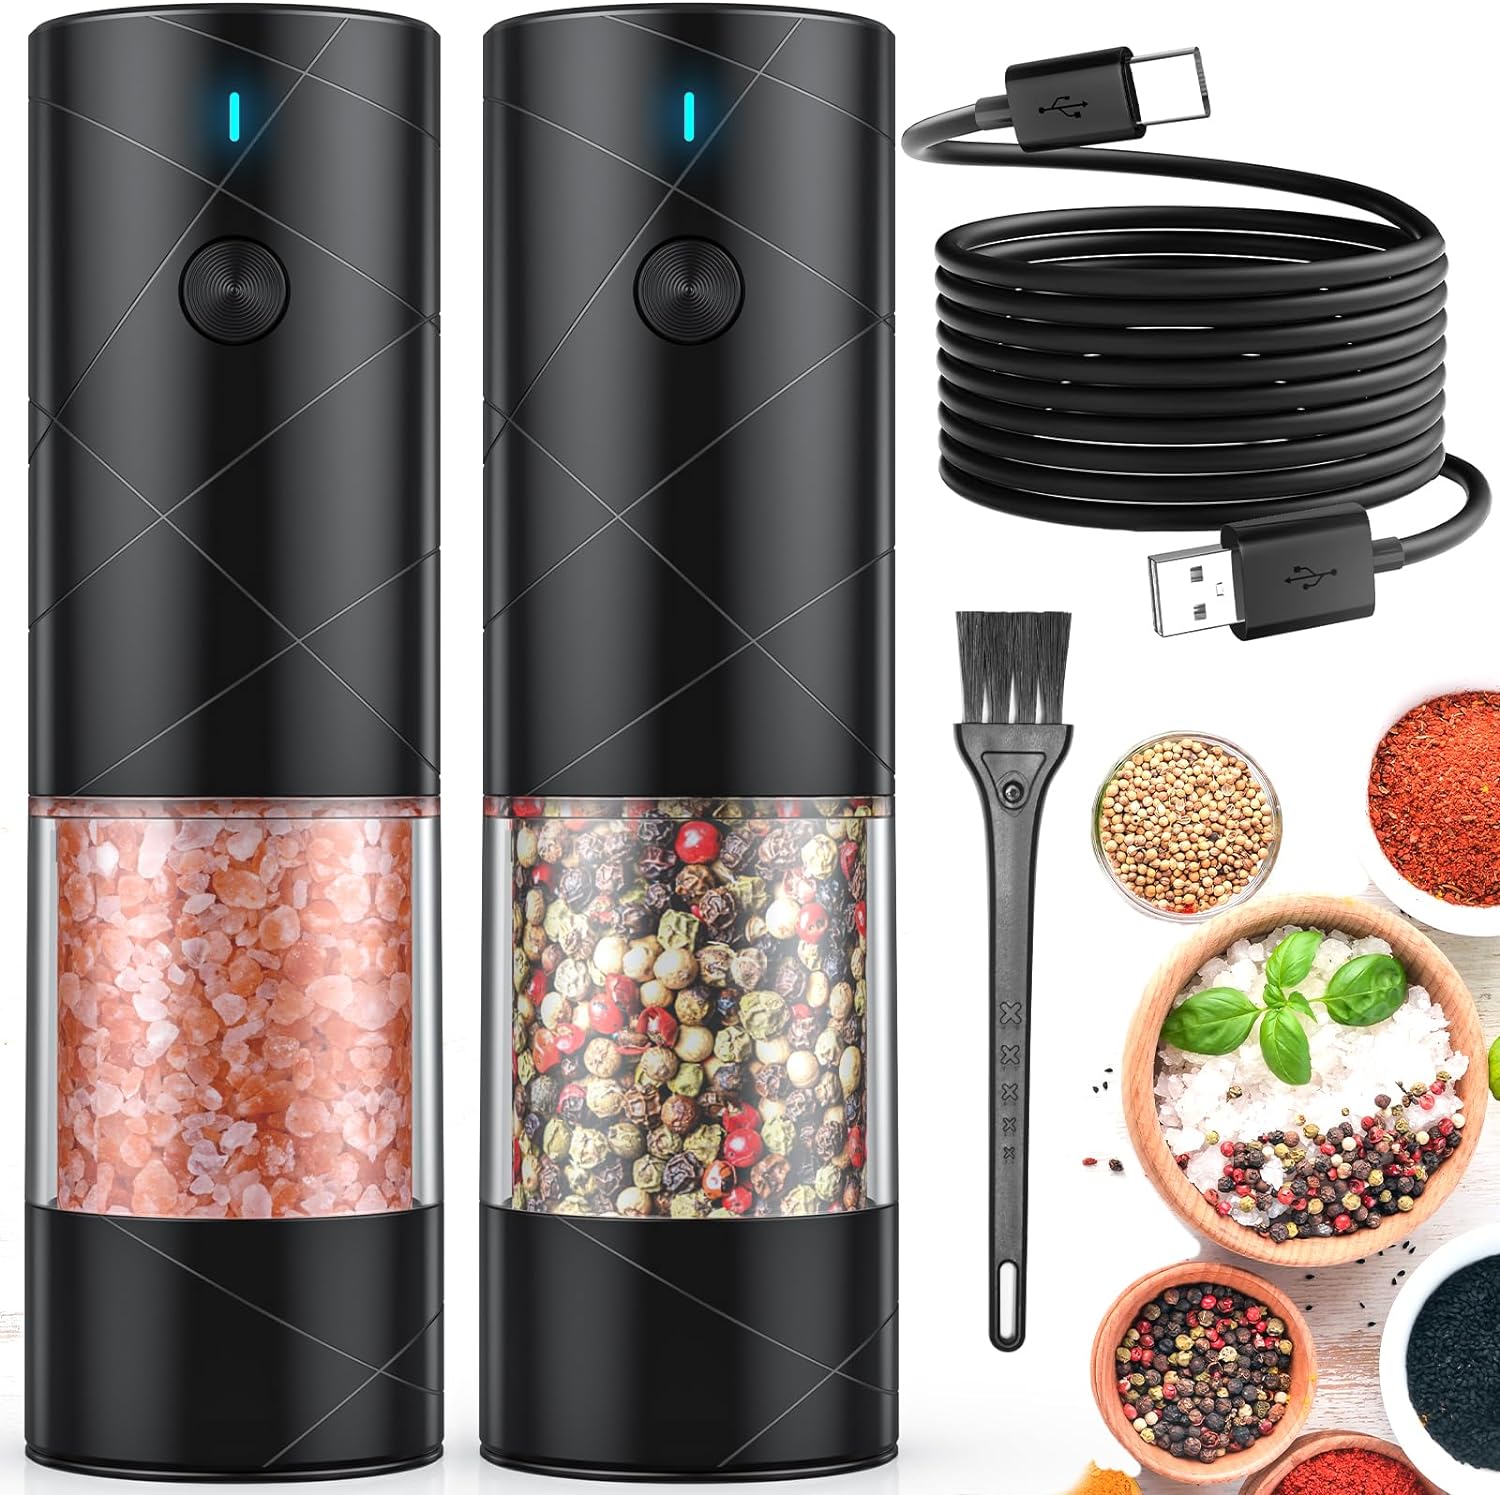  GZOOGHOME Electric Salt and Pepper Mill Grinder Set